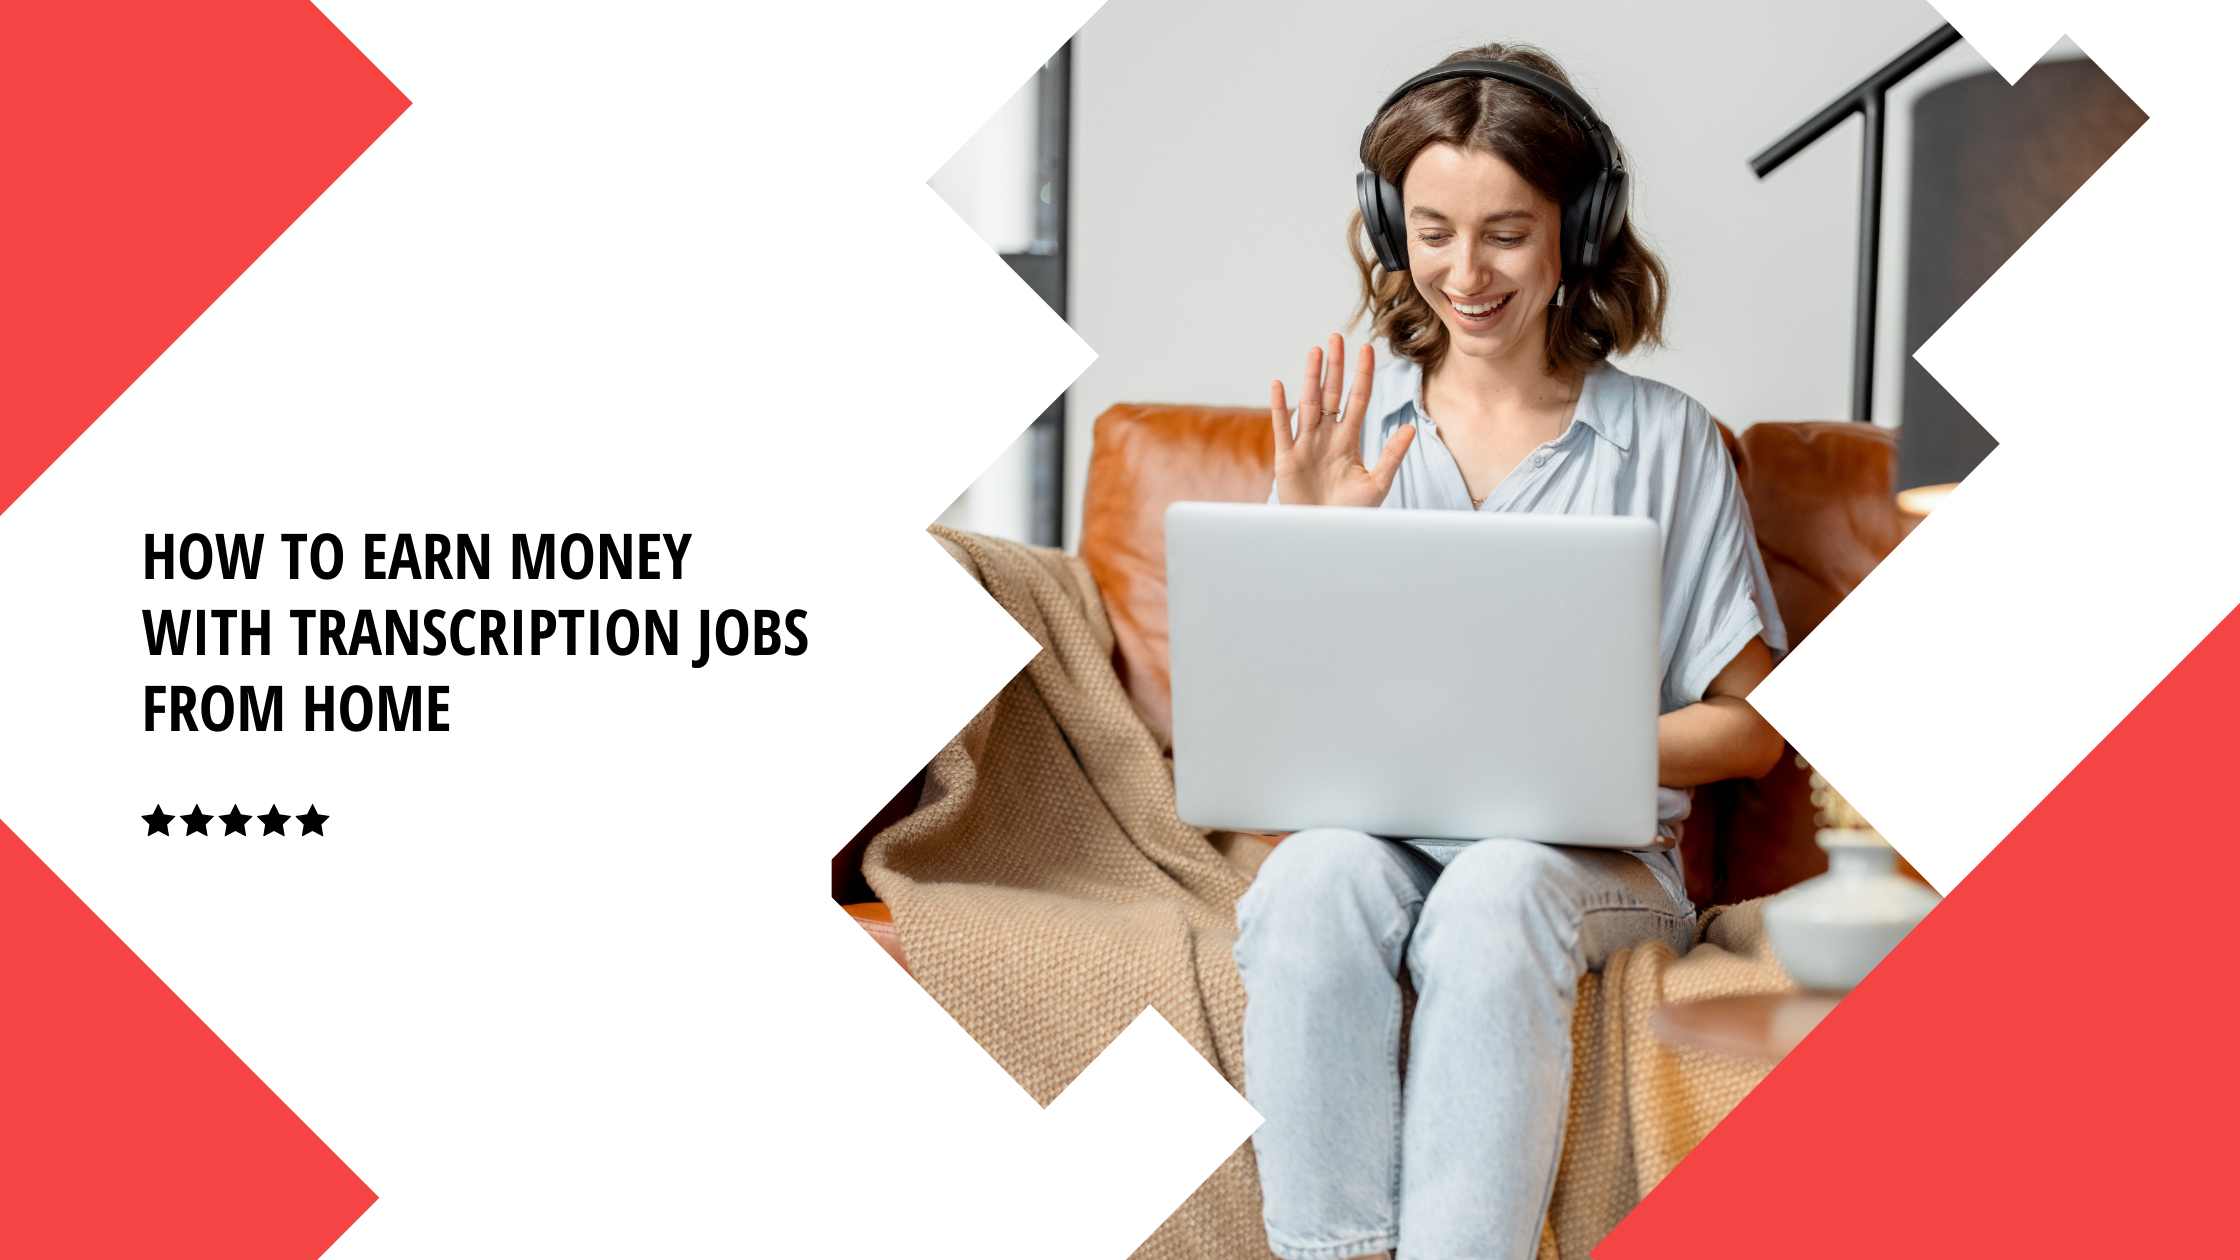 How to earn money with transcription jobs from home